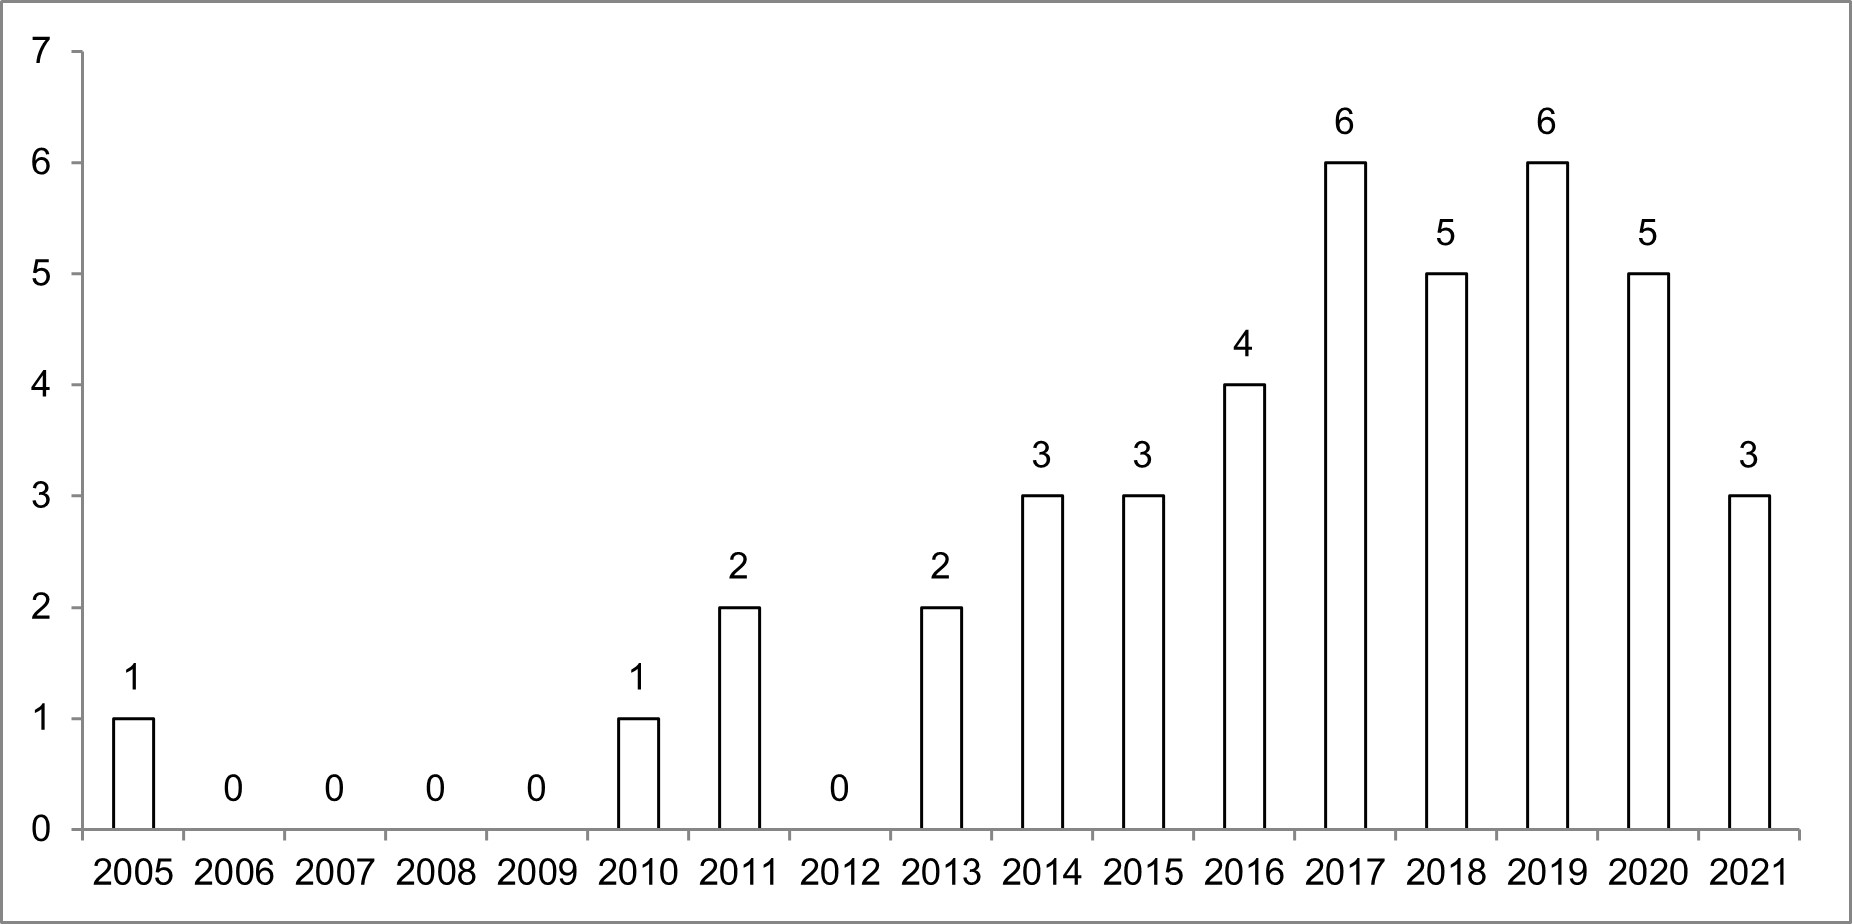 Sustainability approach in PDOs studies: publication trend from 2005-2021 (march), based on selected sample.